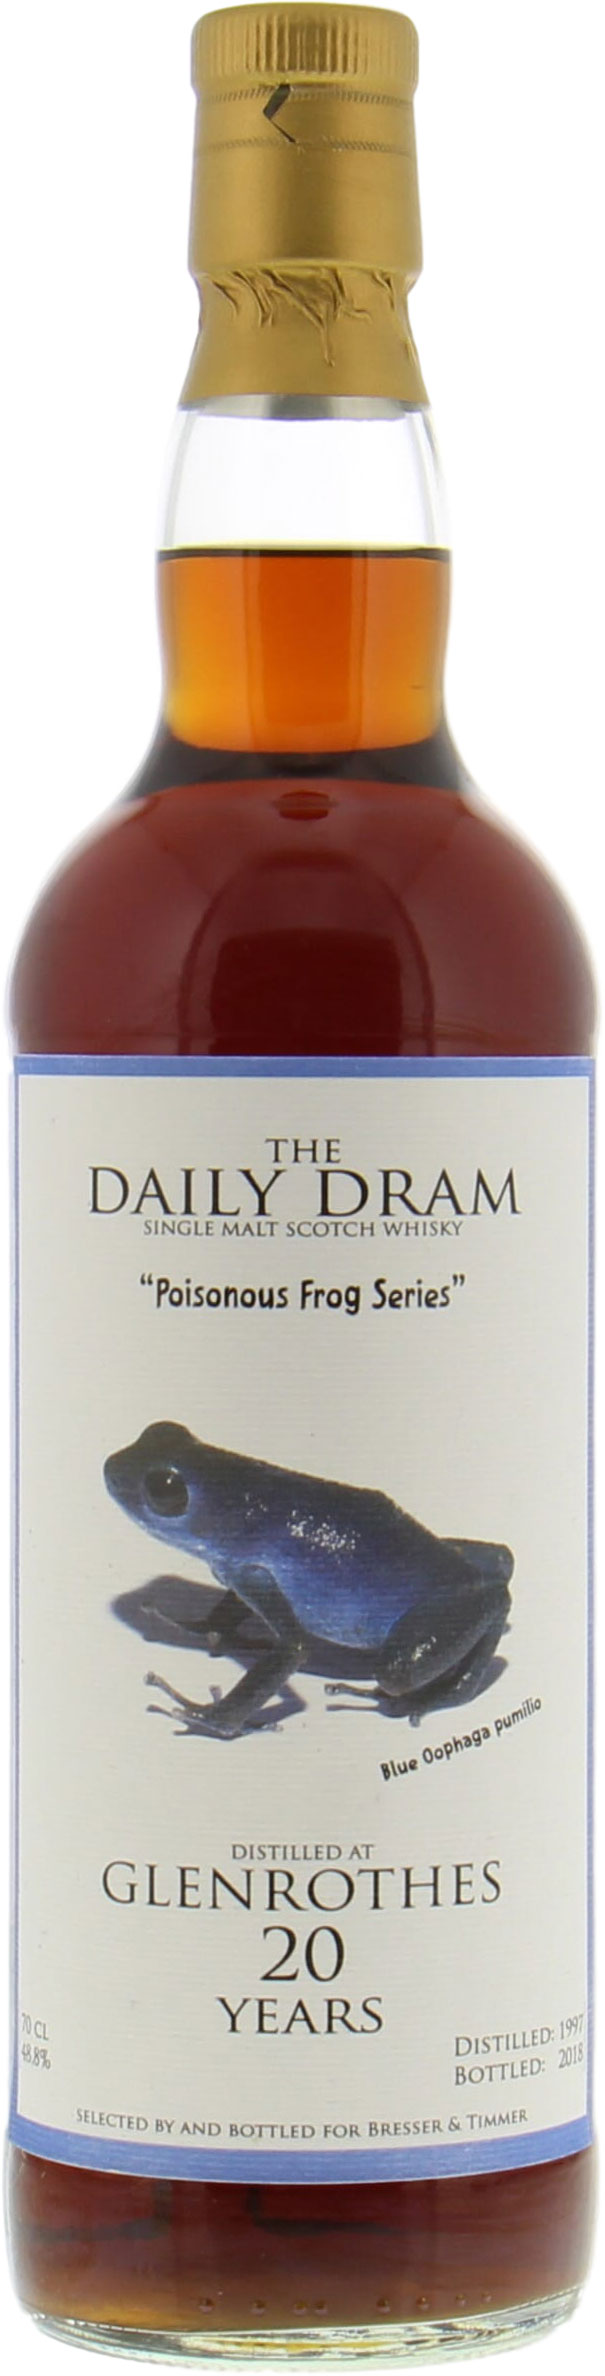 Glenrothes - Daily Dram 20 Years Old Poisonous Frog 48.8% 1997 Perfect